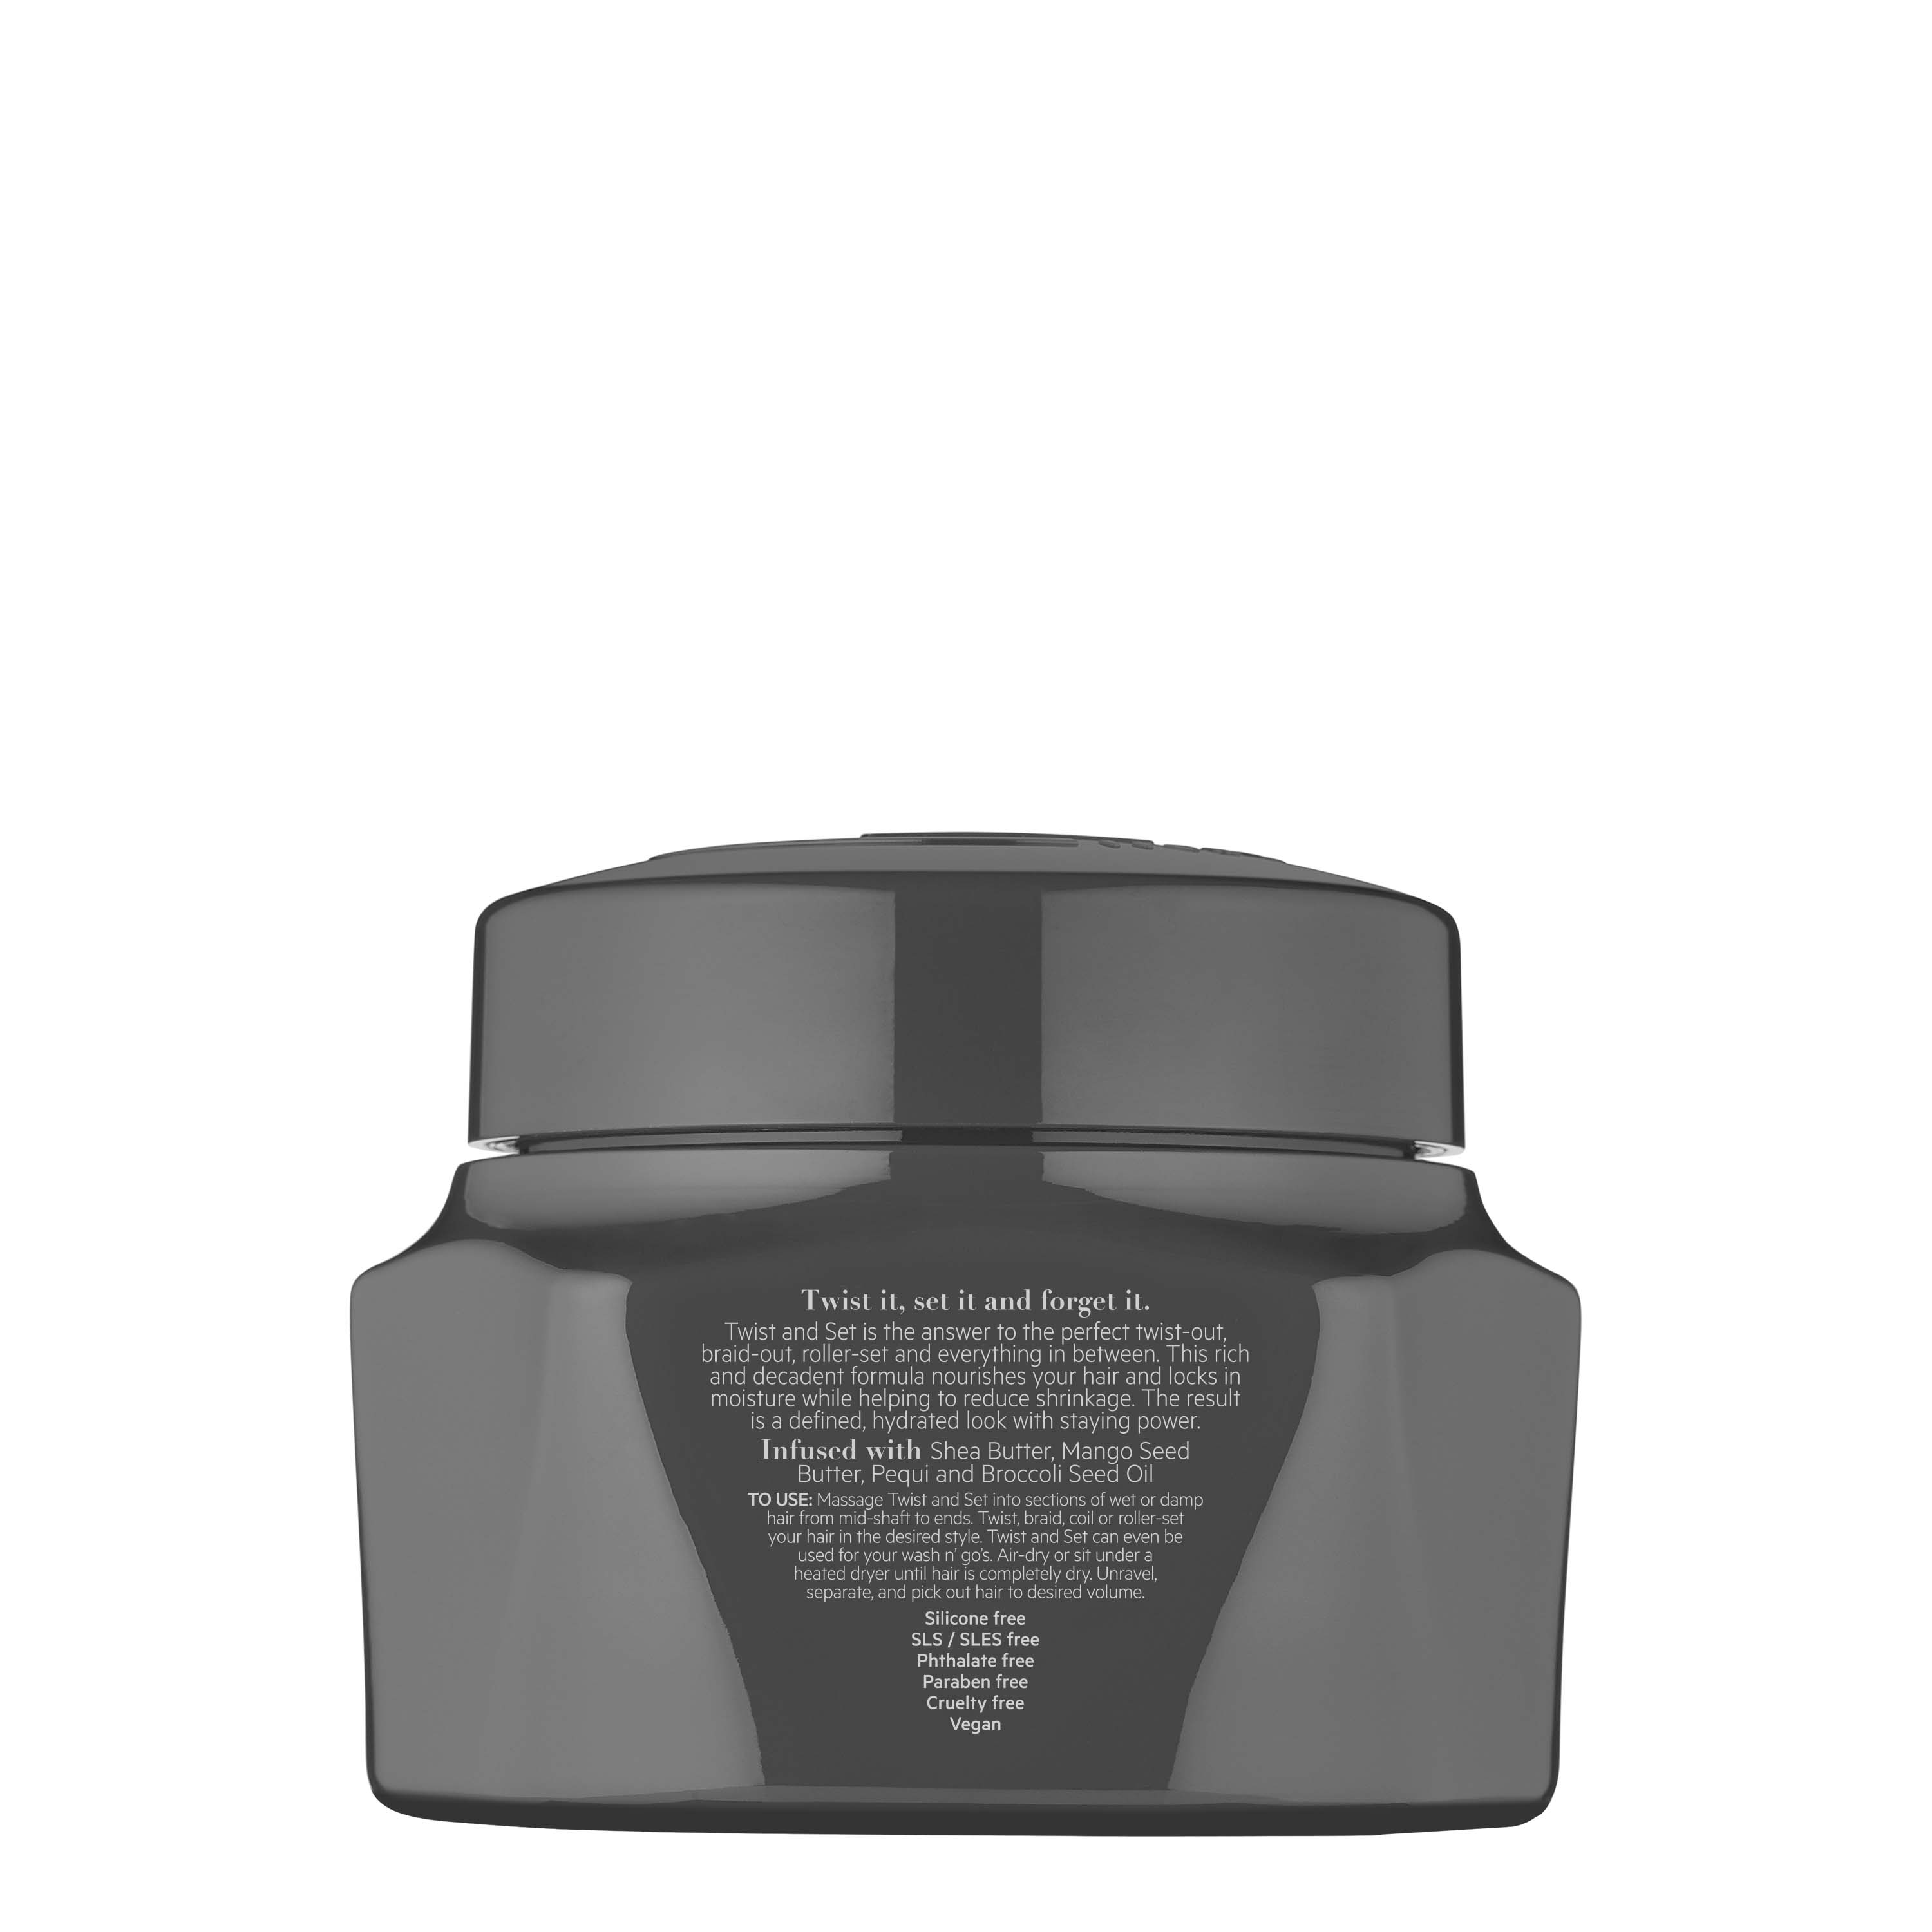 TPH BY TARAJI Twist & Set Twisting Curl Defining Curl Cream for Coily & Curly Hair with Shea Butter, Castor Oil & Mango Seed Butter | Natural Hair Styling Product, 8 oz. - image 2 of 5